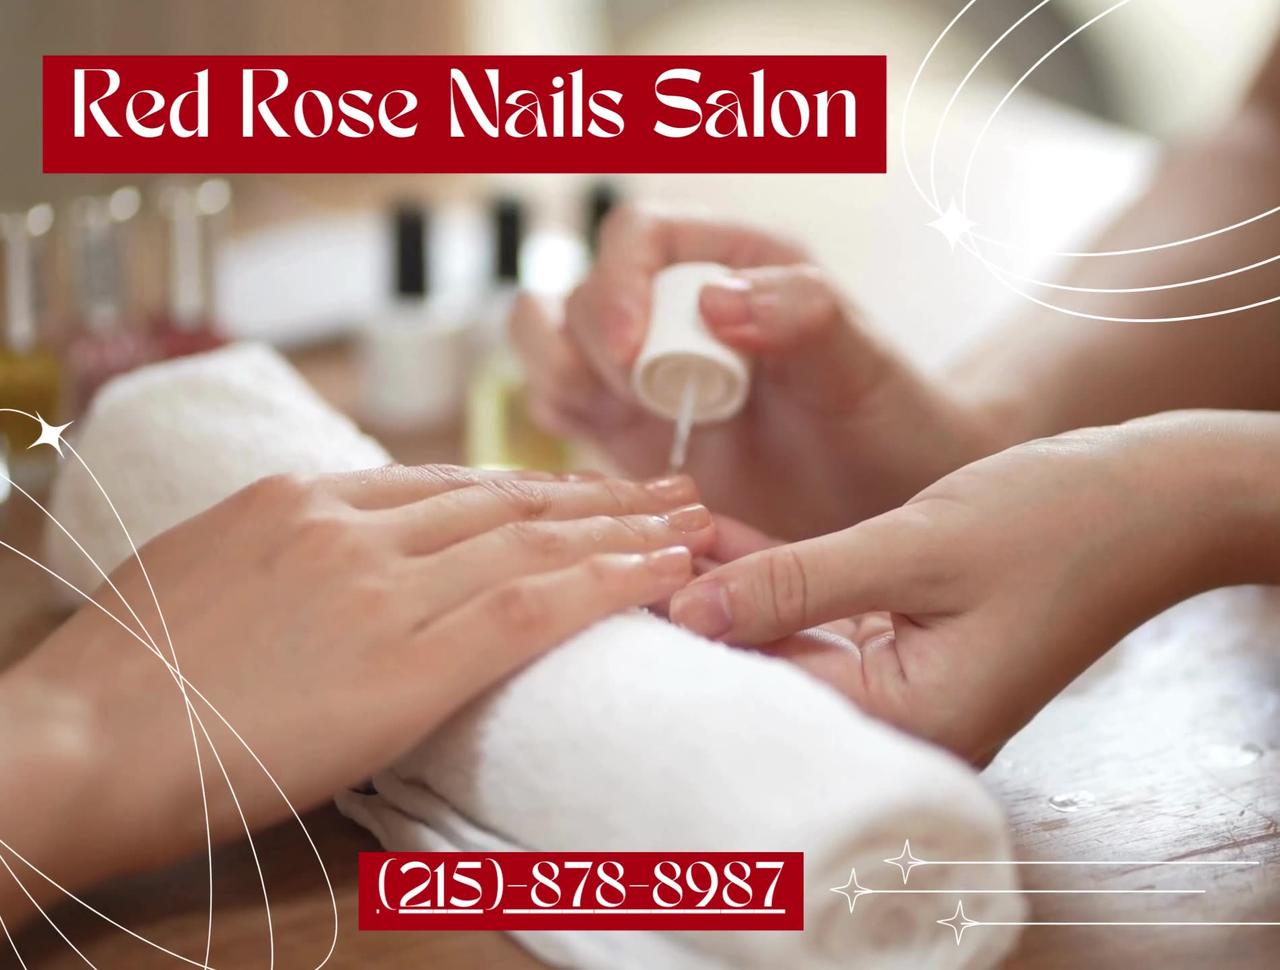 Red Rose Nails Salon